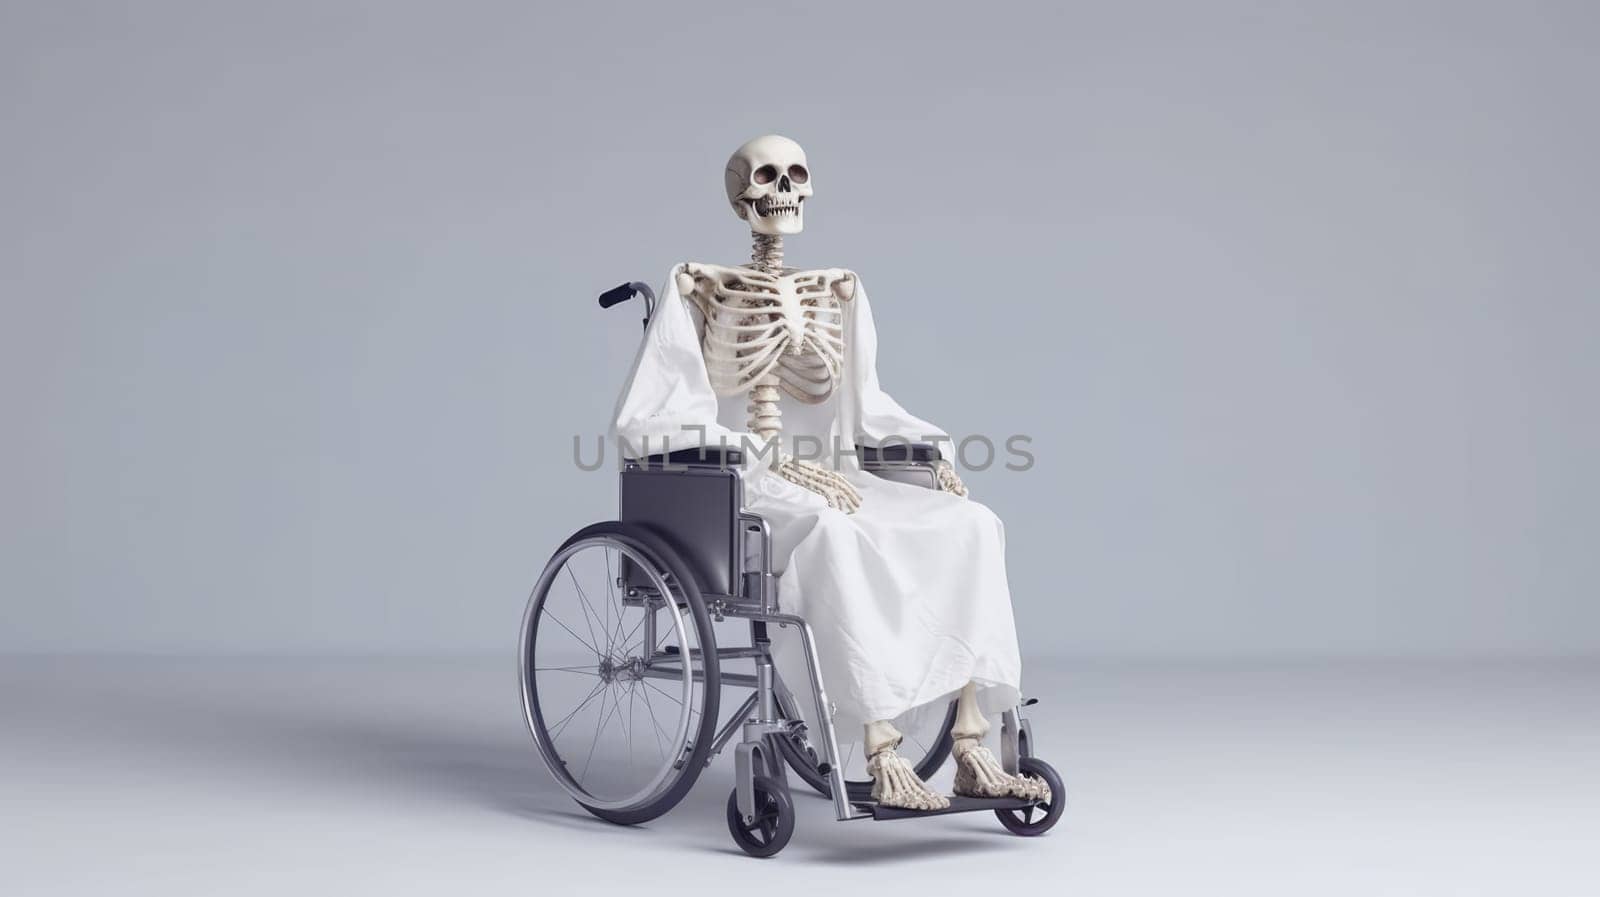 Human skeleton in medical wheelchair for invalid patient on white empty background. Hospital health care support.